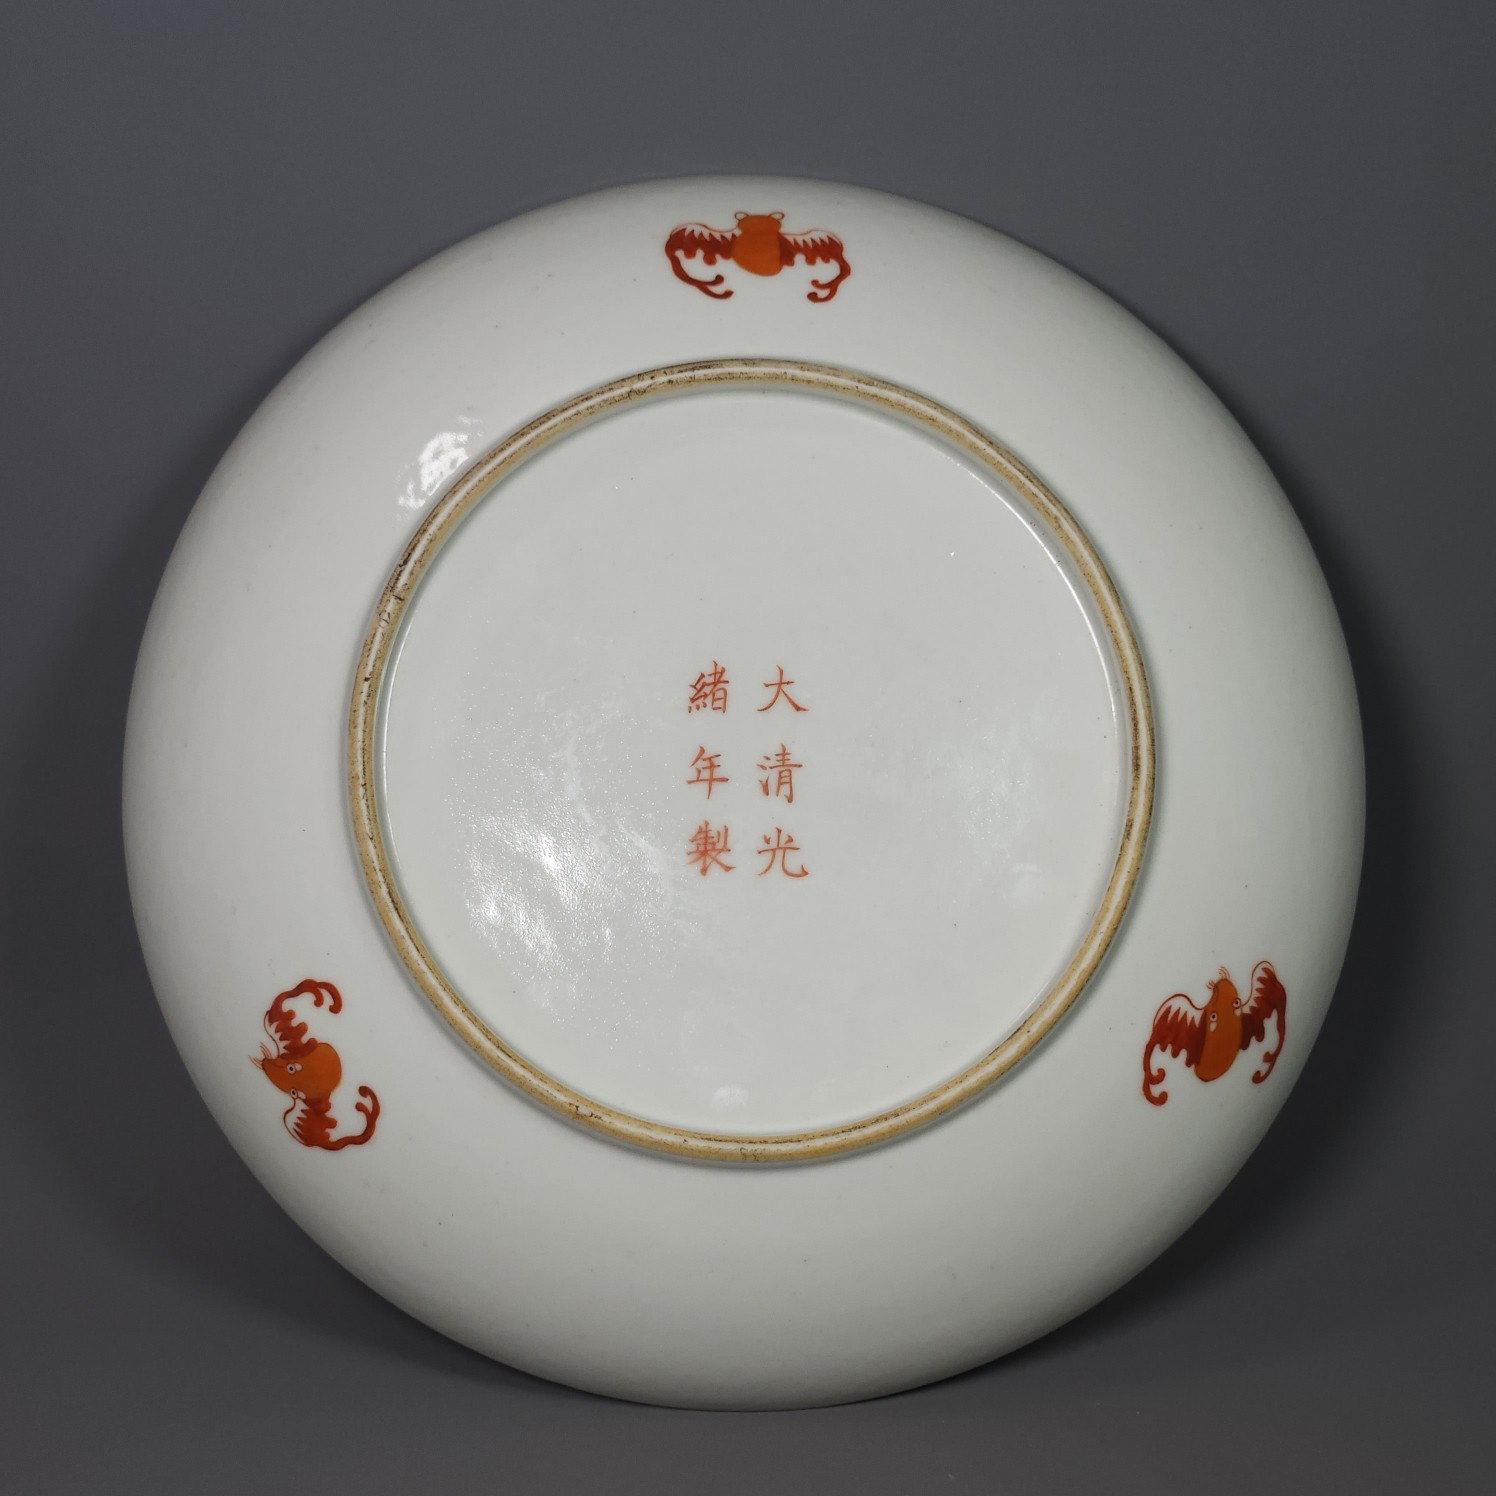 Guangxu Sanskrit red dragon and phoenix plate in the Qing Dynasty - Image 9 of 9